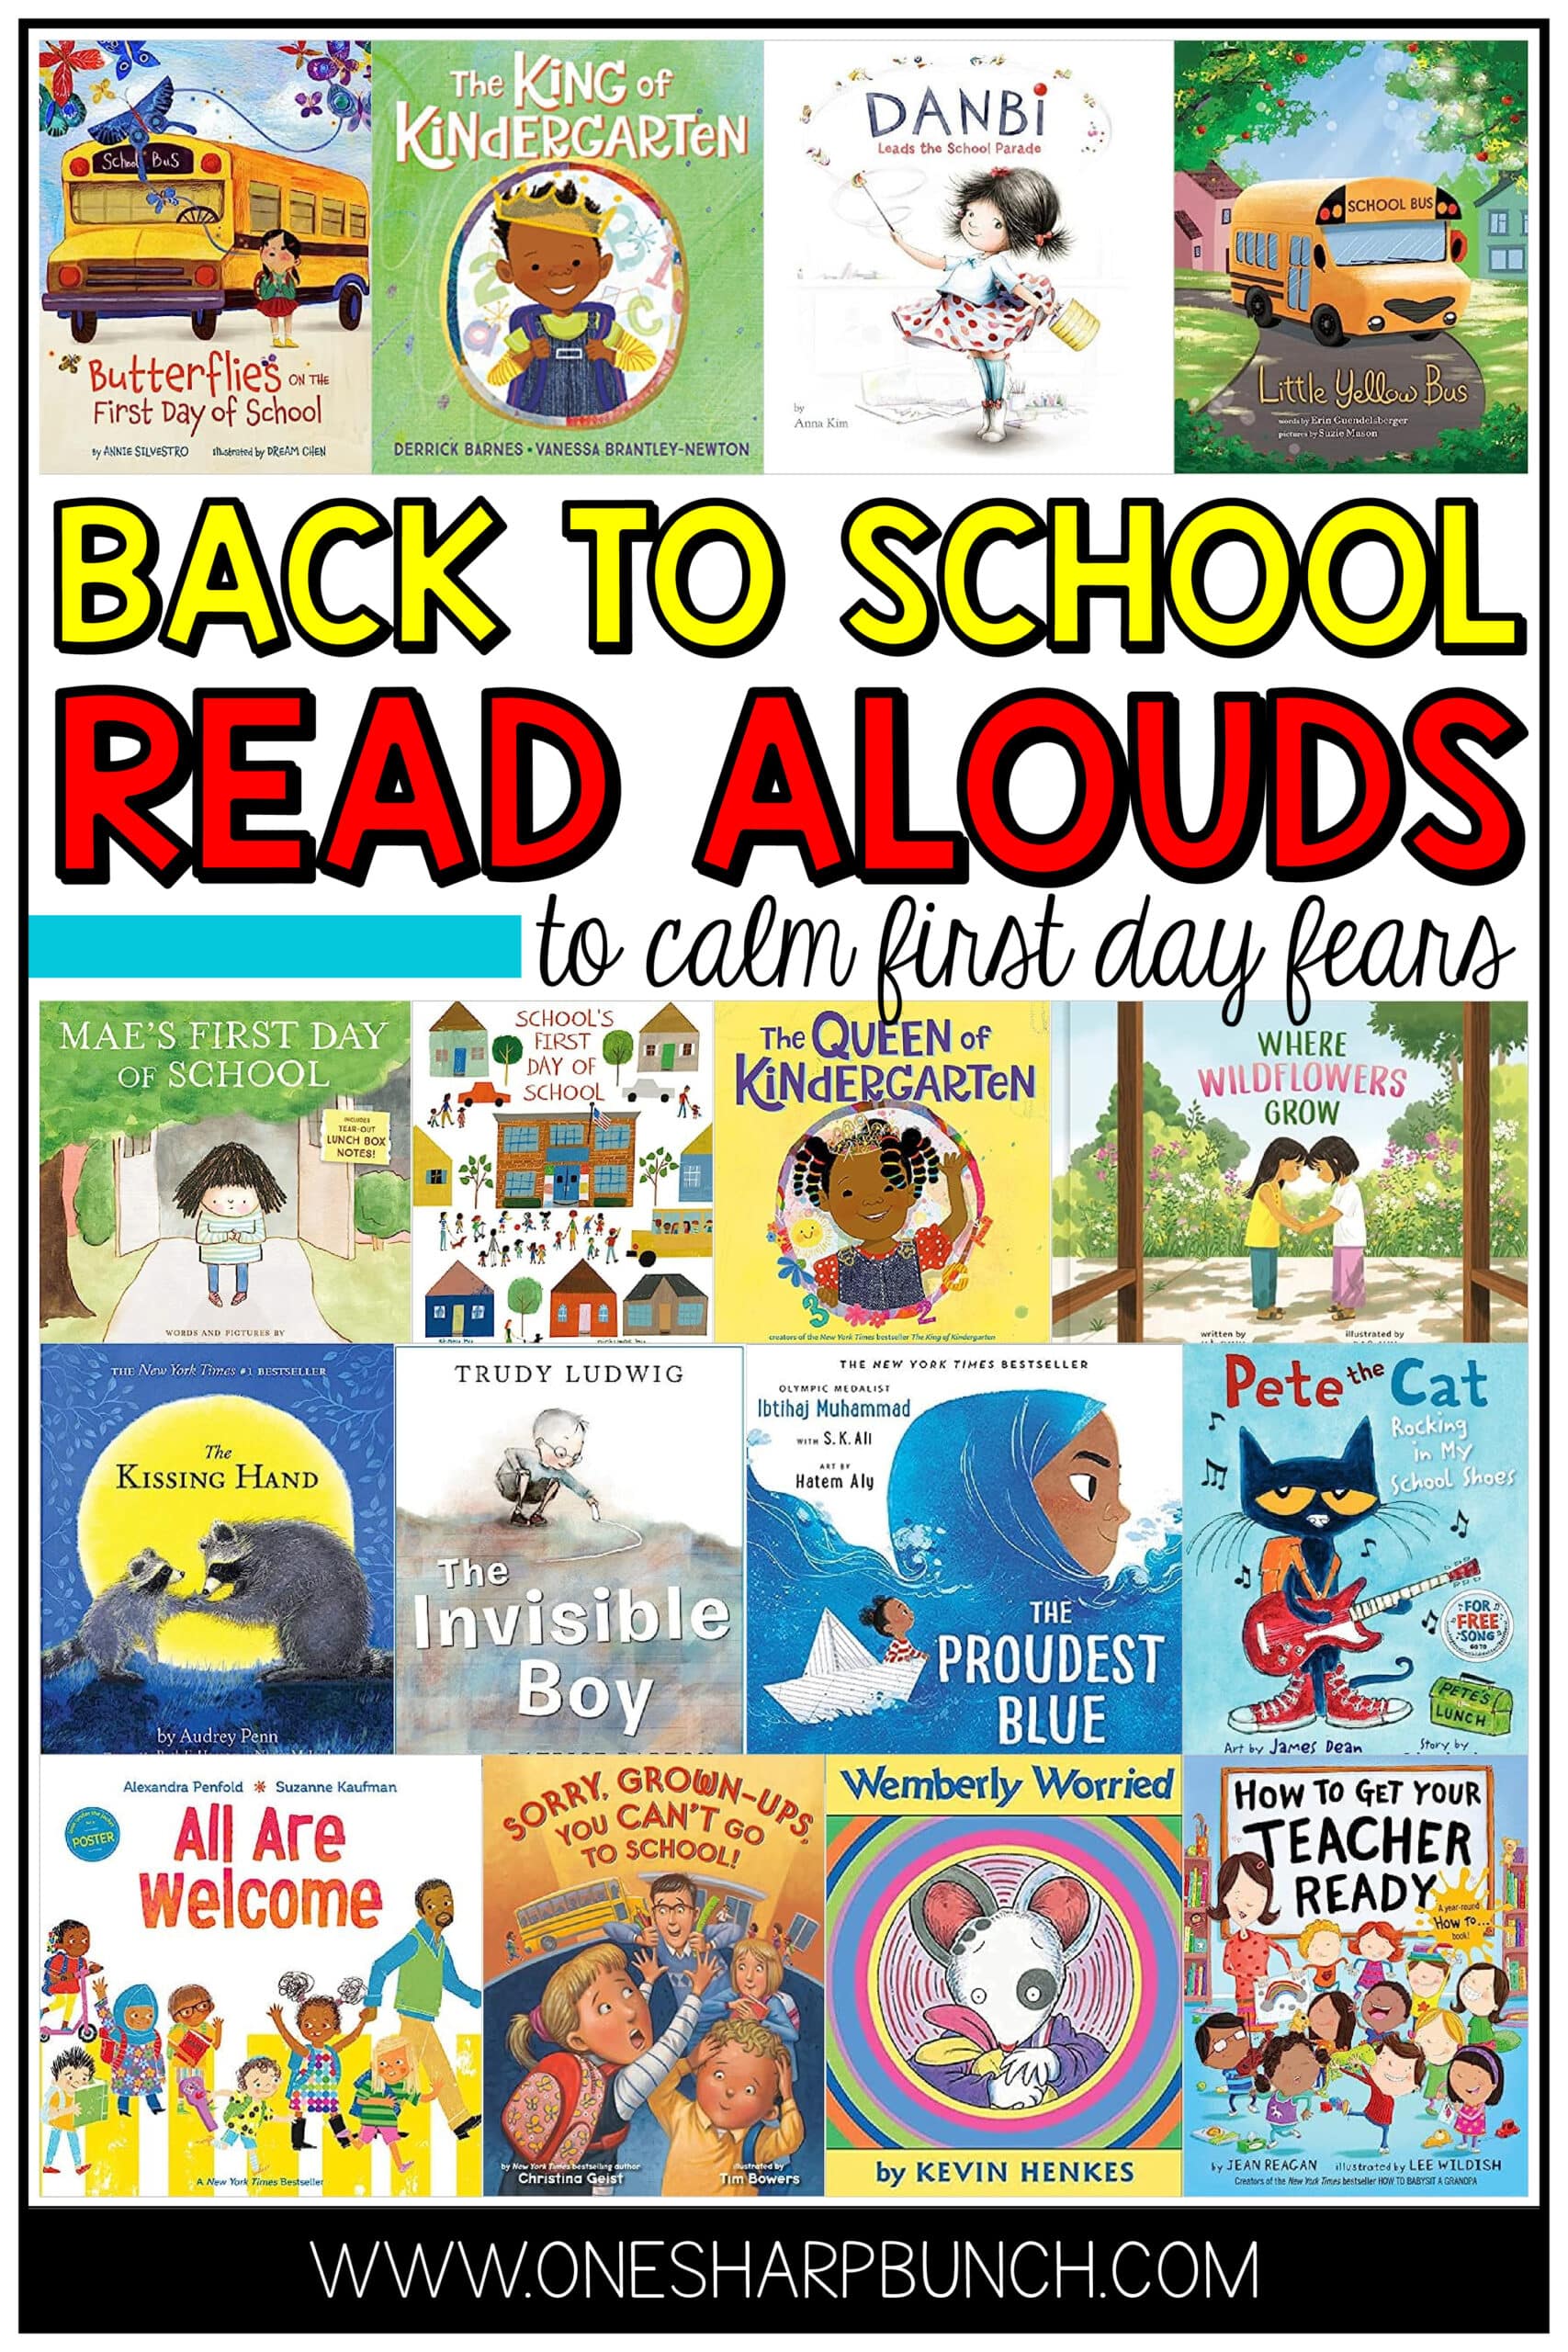 Back to school books are a great way to calm your students first day jitters. Today, I am sharing over 40 back to school read alouds for kids that will help them adjust to their new classroom and get excited about the school year. These back to school books for preschool, kindergarten, and first grade pair great with first week lesson plans, back to school crafts, and more. Find back to school activities and more in this list of back to school read alouds.